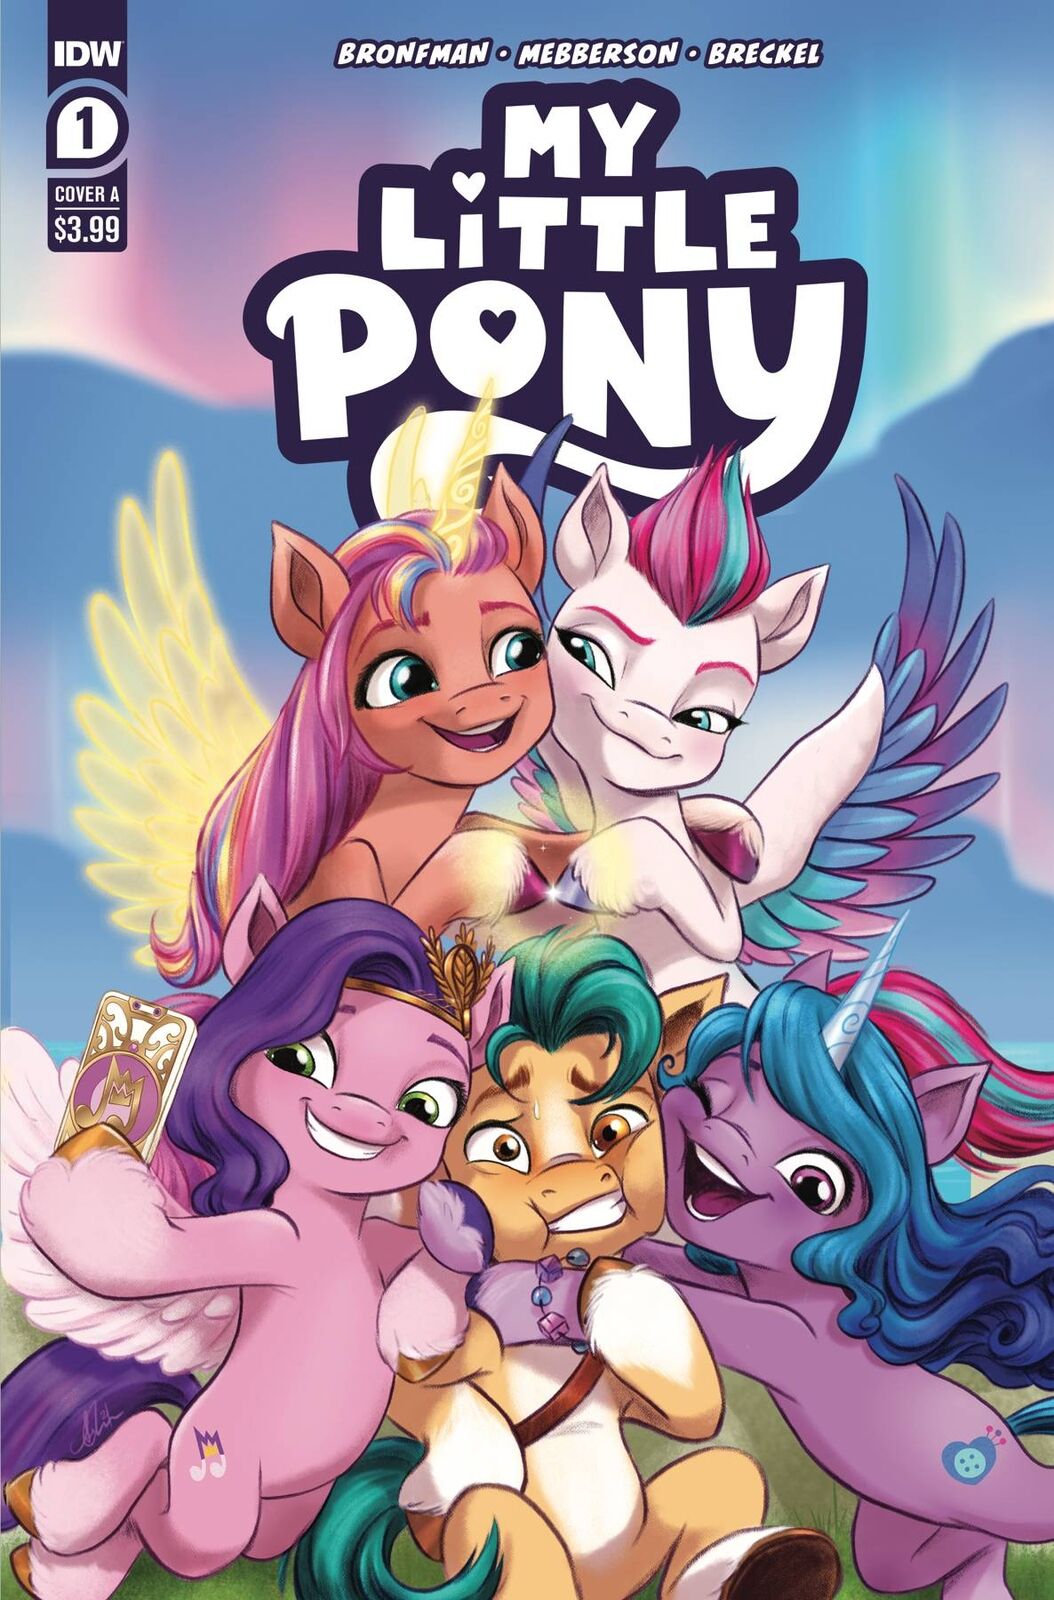 My Little Pony #1-17 | Select Covers | IDW Comics NM 2022-2023